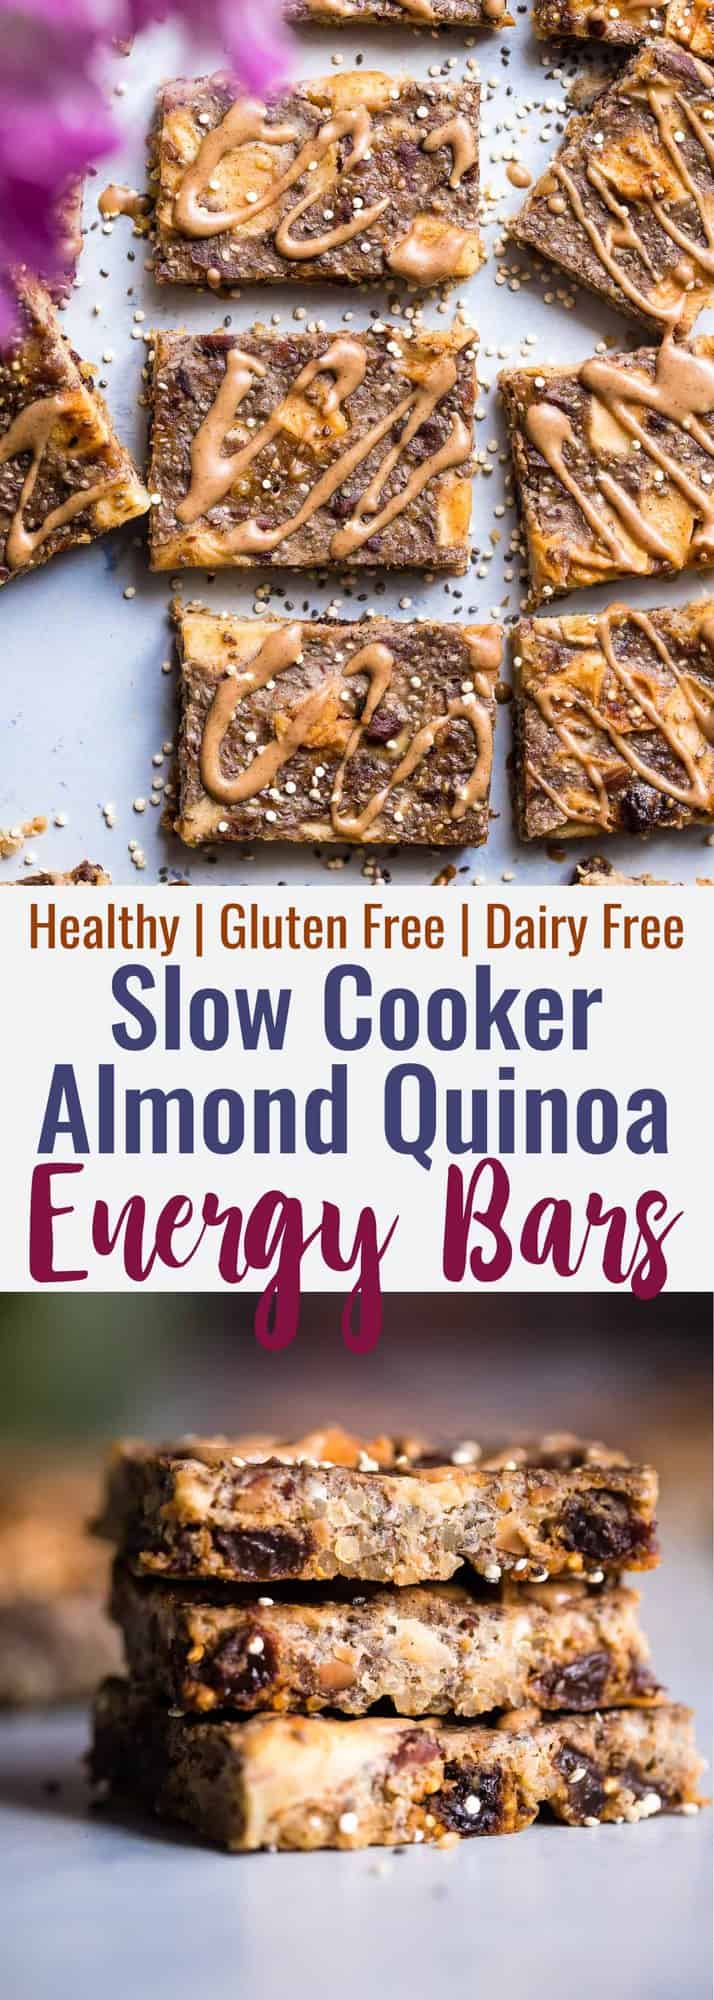 Healthy Quinoa Breakfast Bars in the Slow Cooker - The slow cooker basically makes these energy quinoa breakfast bars for you! Gluten and dairy free and loaded with fiber to keep you full! Great for snacks too! | #Foodfaithfitness | #Glutenfree #Dairyfree #Healthy #Slowcooker #Crockpot